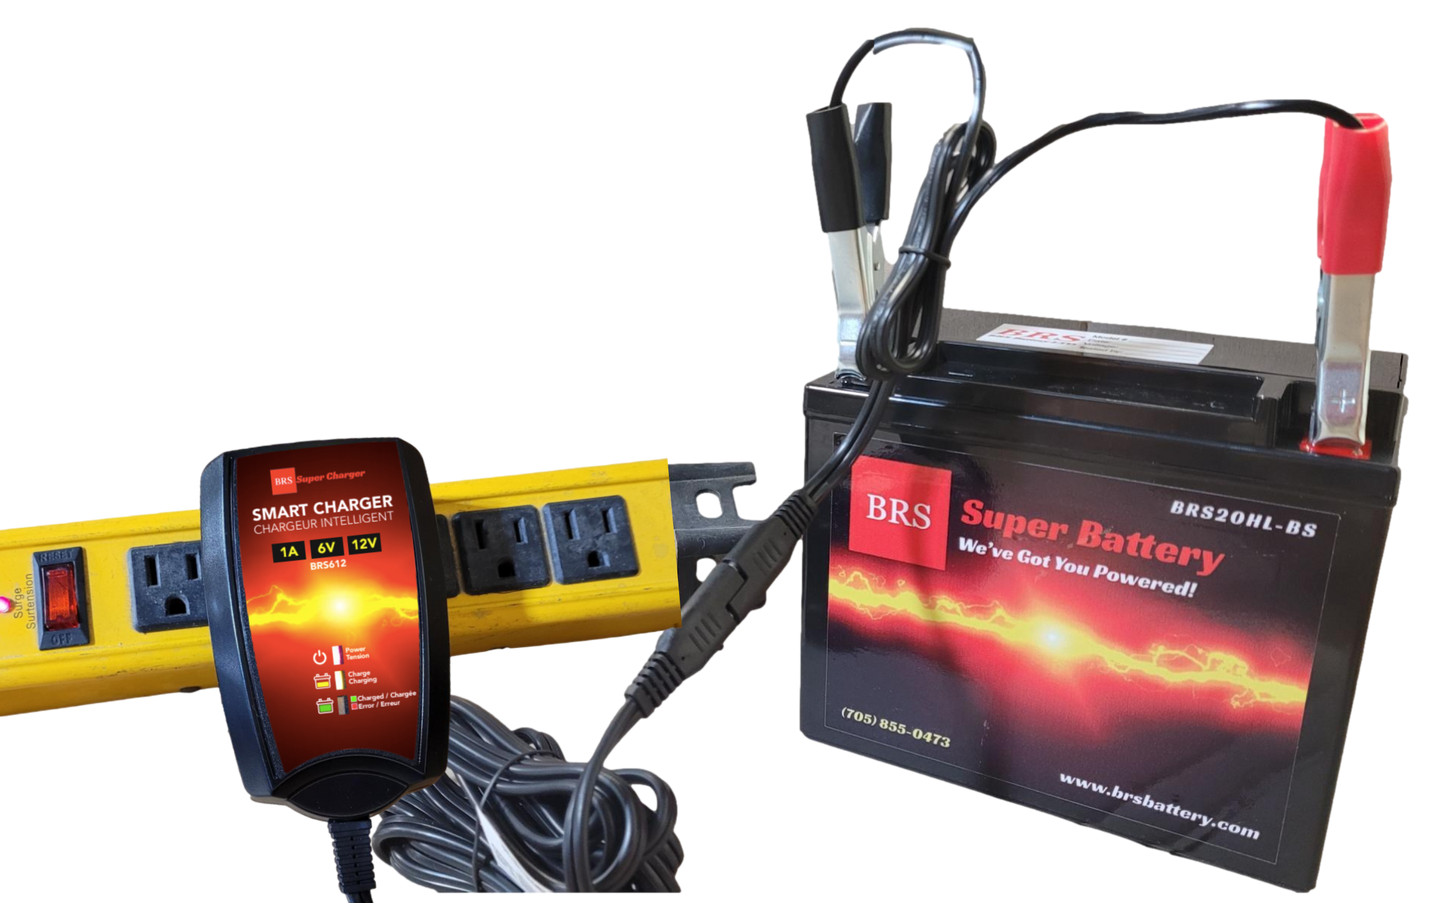 High Performance BRS14-BS 10 Year Battery & Smart Charger / Maintainer Combo Bundle Kit 12v Sealed AGM PowerSports Battery - BRS Super Battery